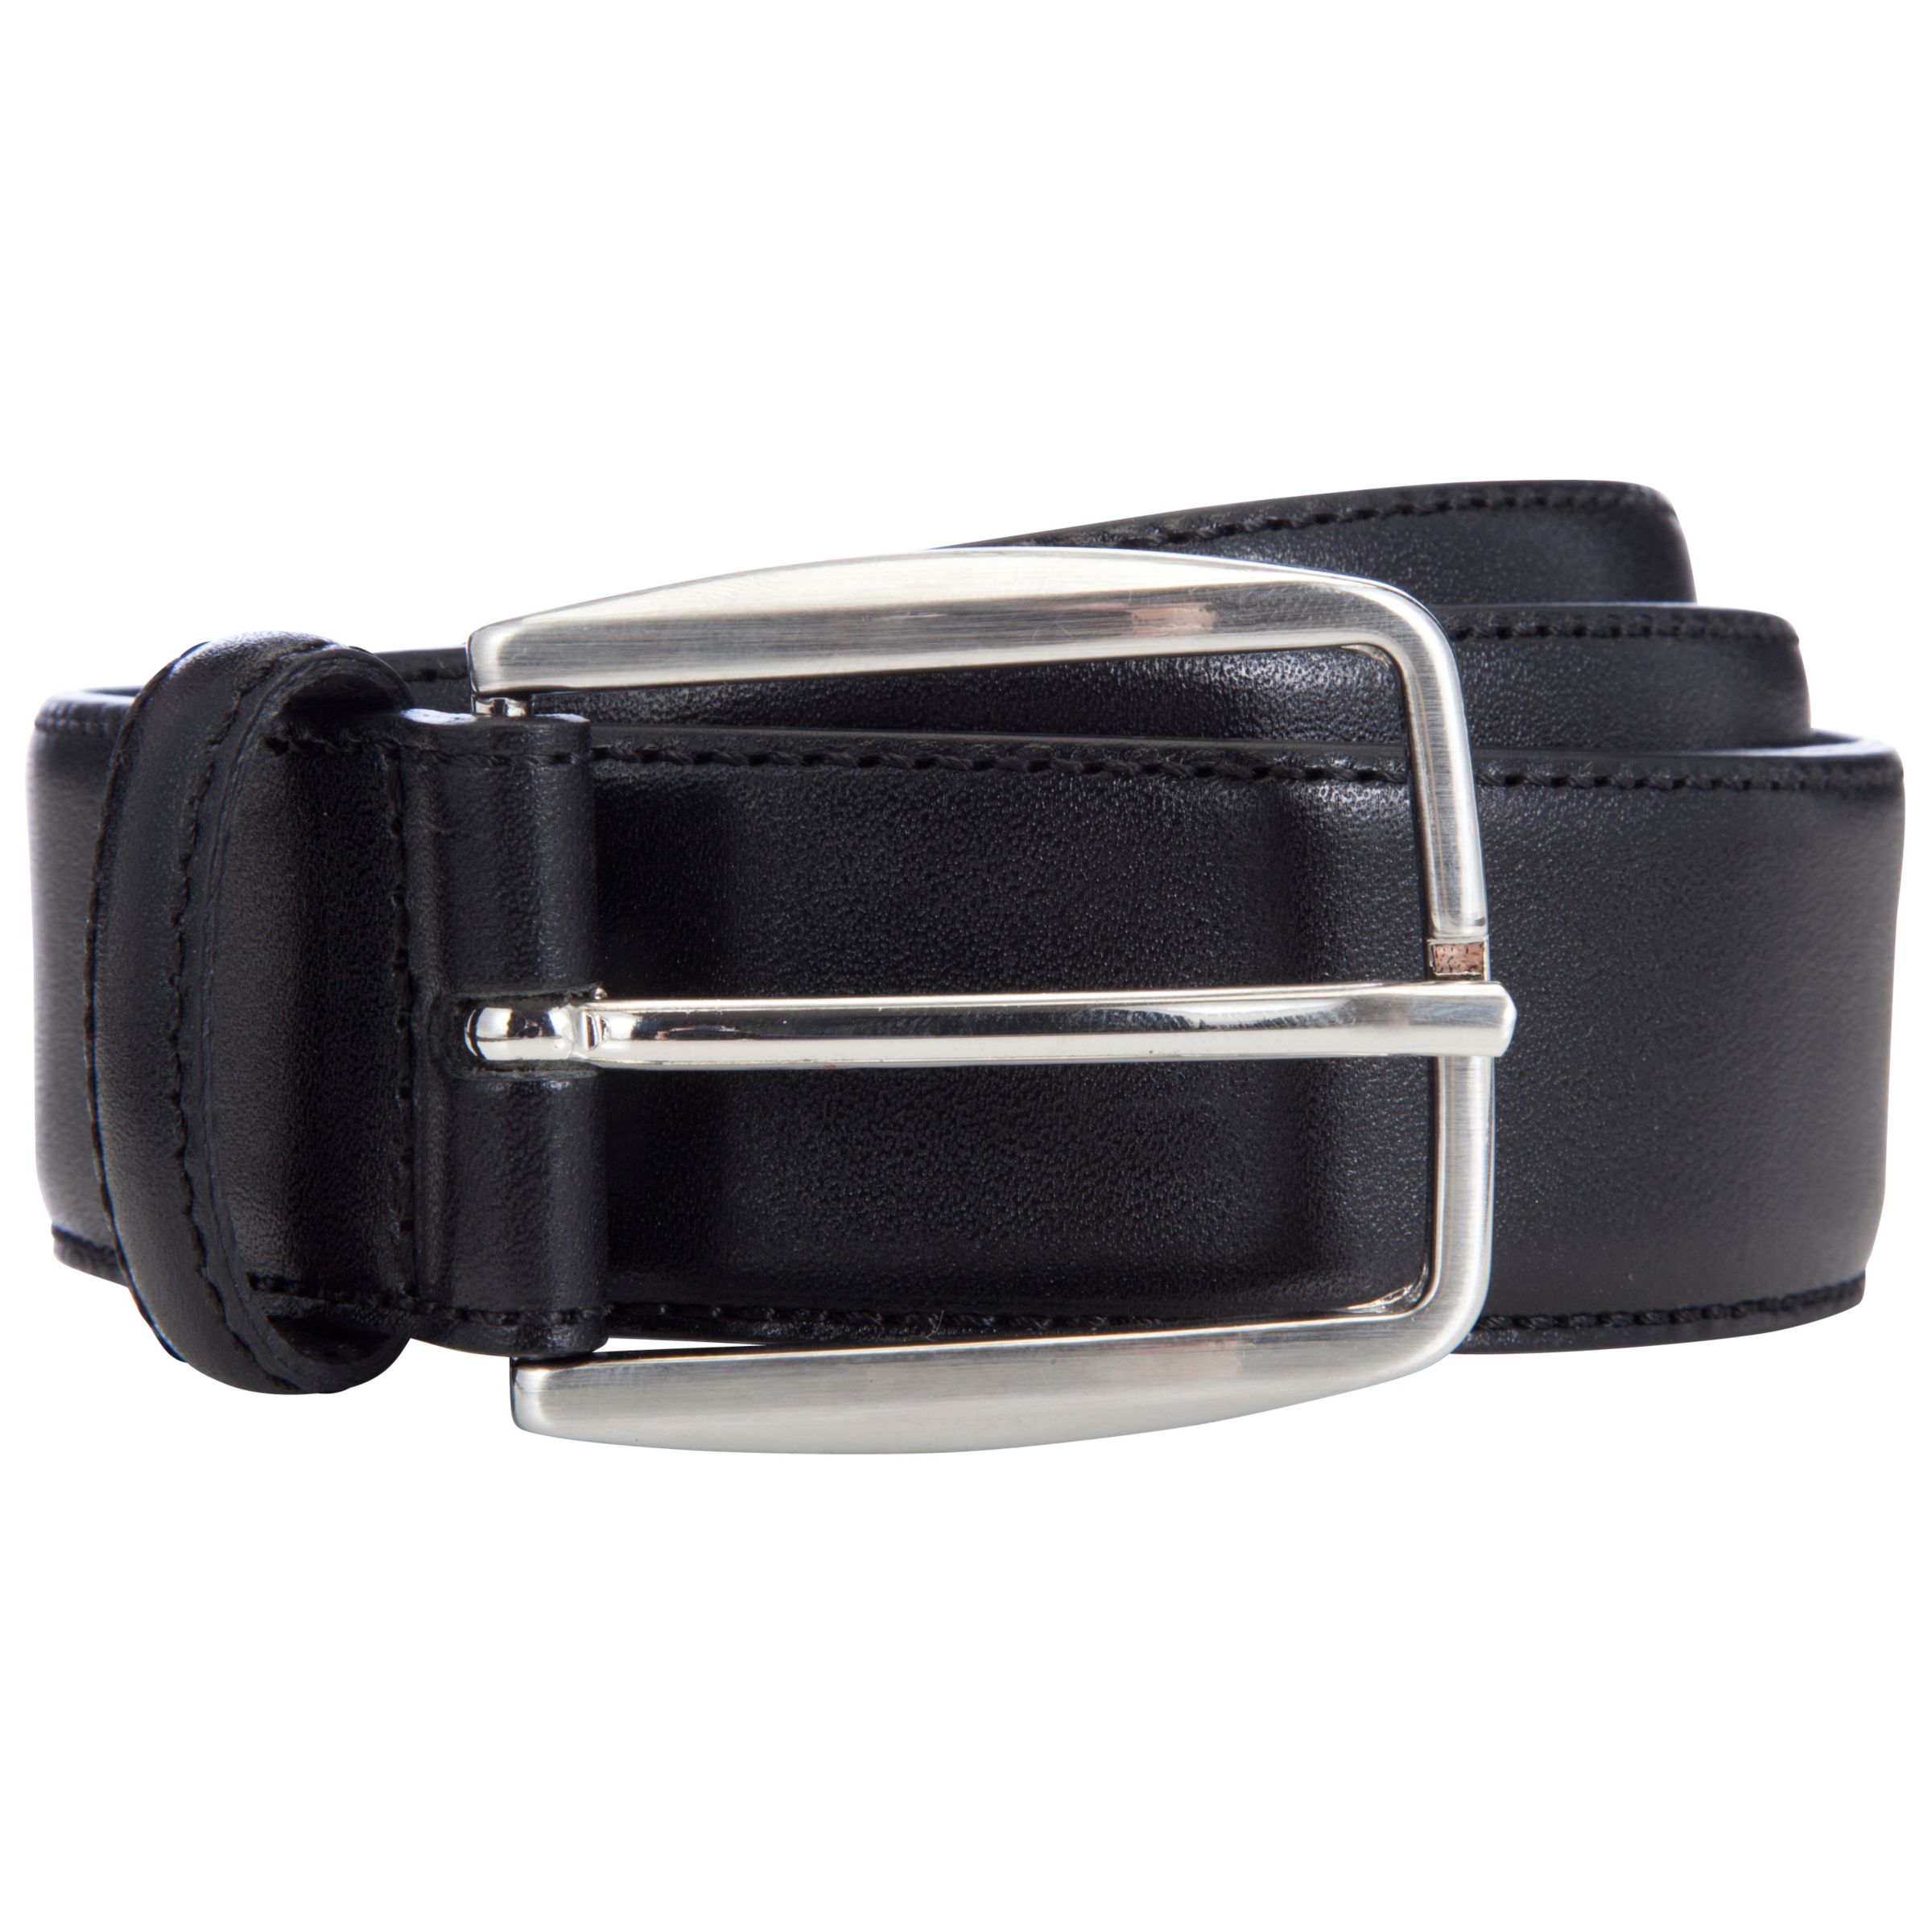 John Lewis & Partners Made in Italy Leather Belt, Black, S